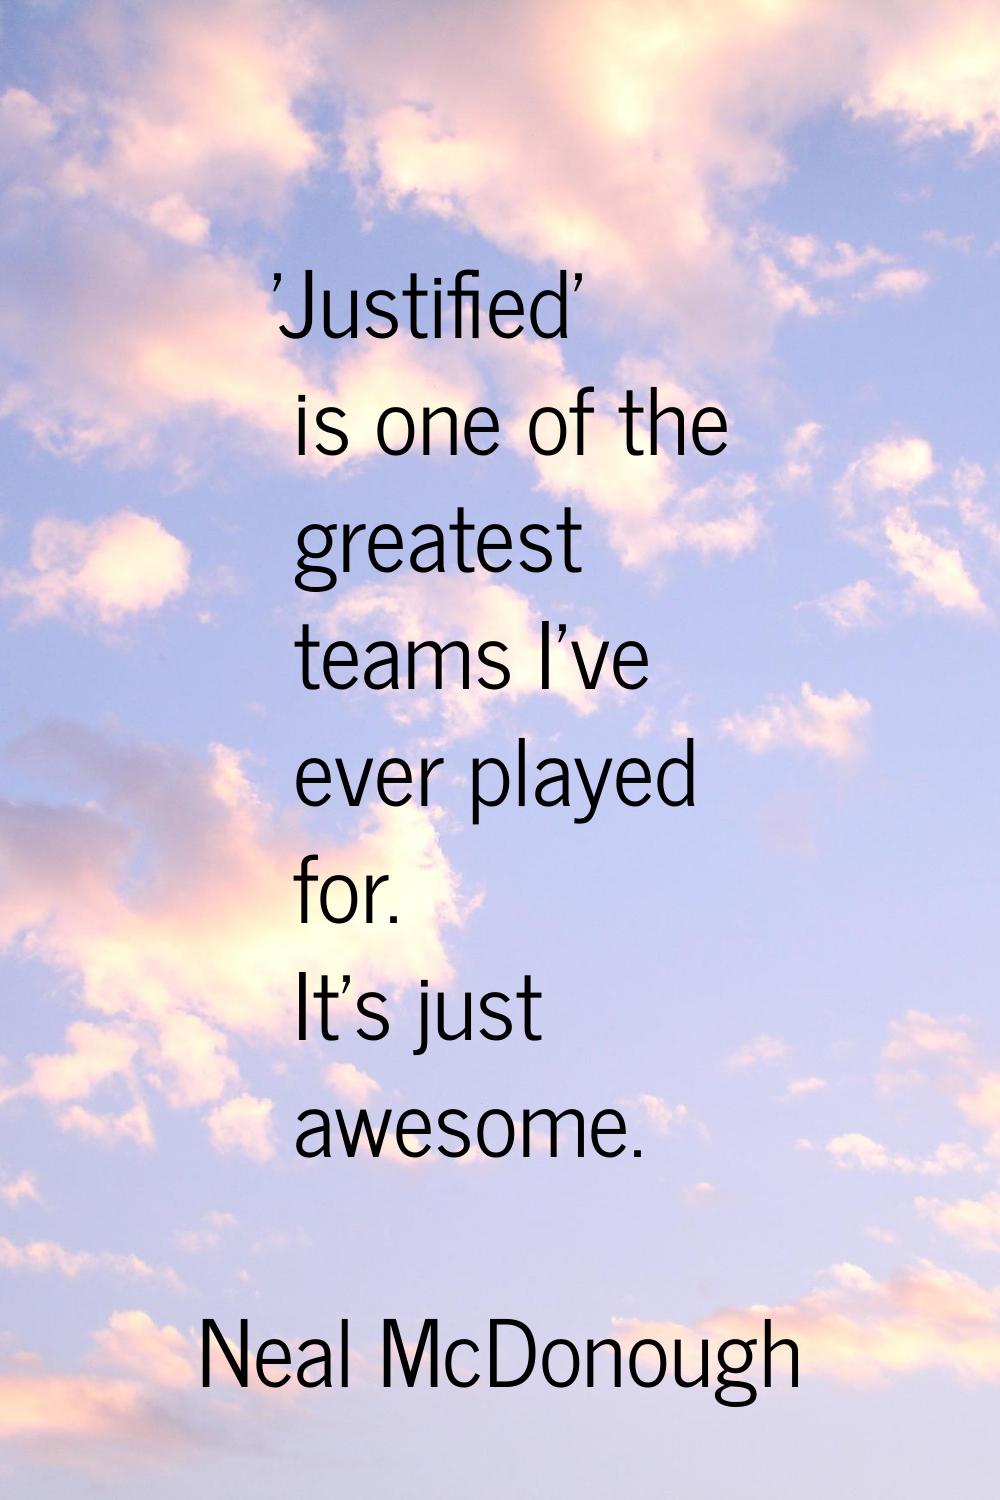 'Justified' is one of the greatest teams I've ever played for. It's just awesome.